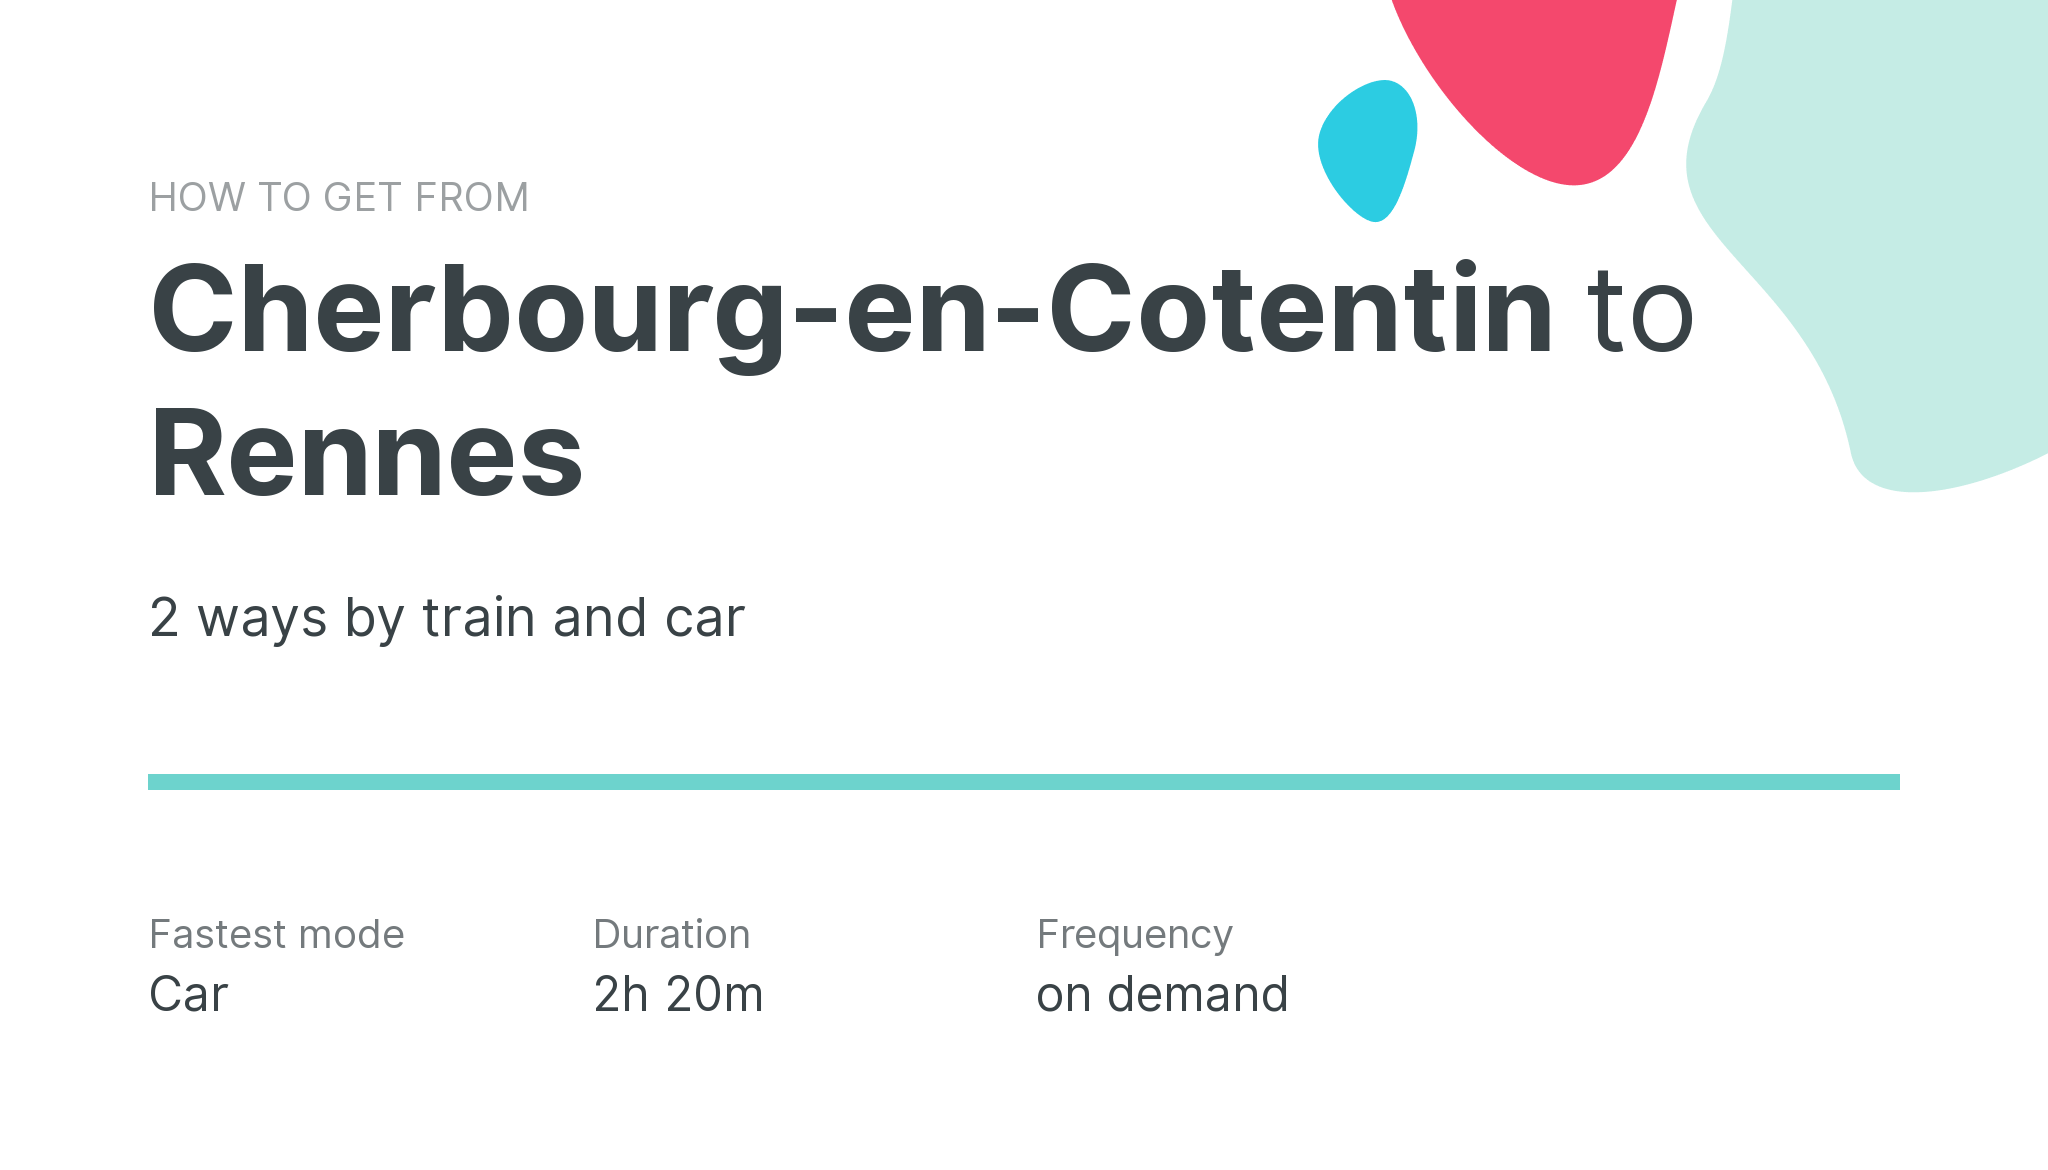 How do I get from Cherbourg-en-Cotentin to Rennes